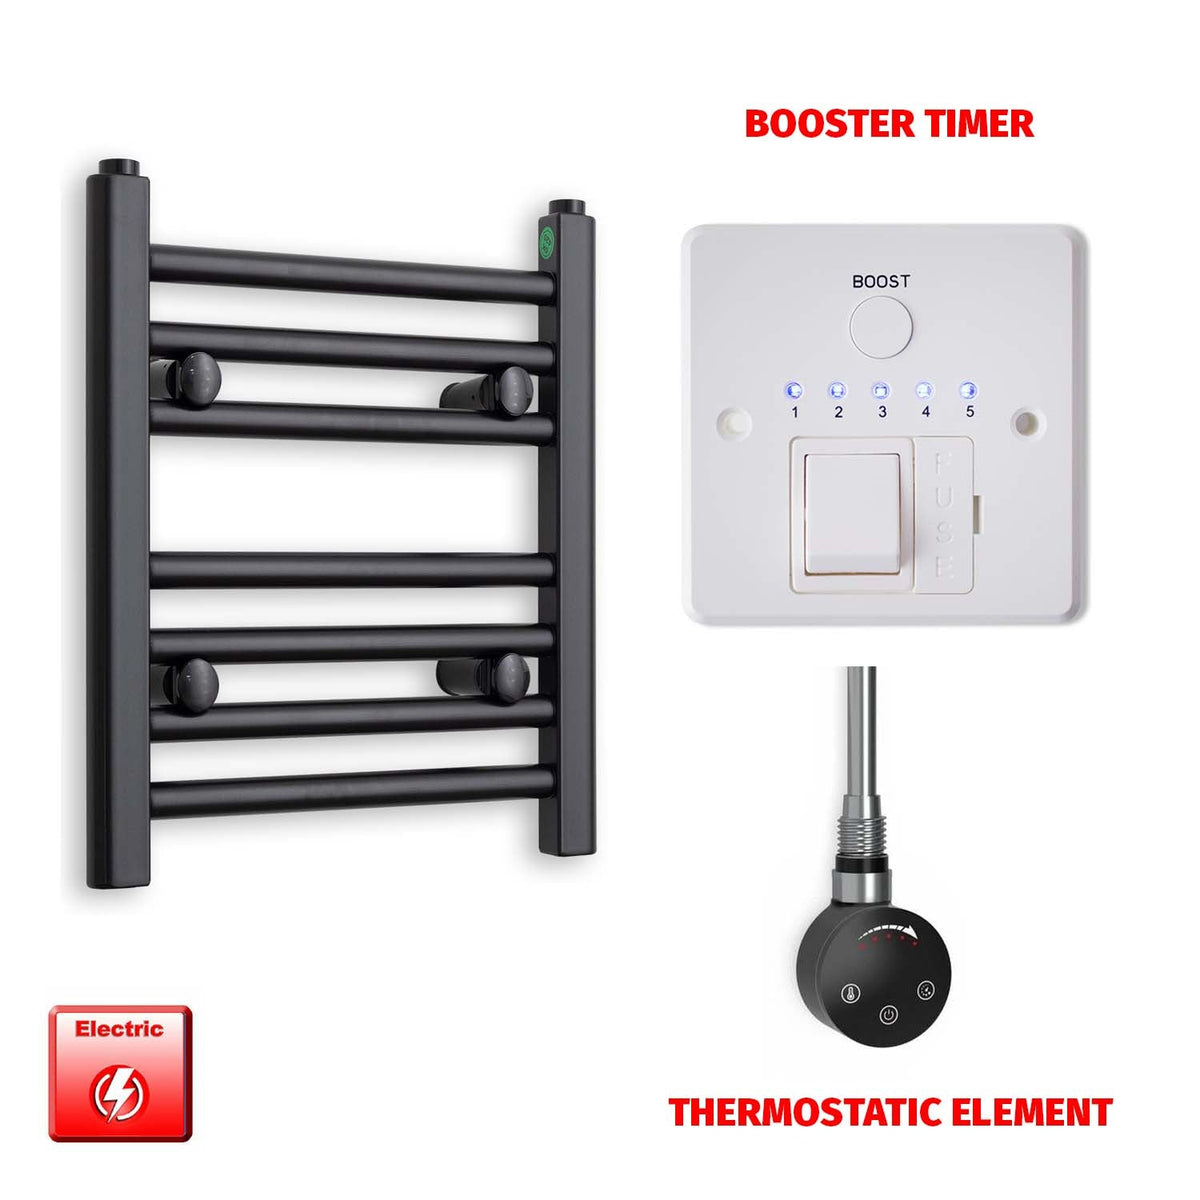 400 x 300 Flat Black Pre-Filled Electric Heated Towel Radiator HTR SMART Thermostatic Booster Timer